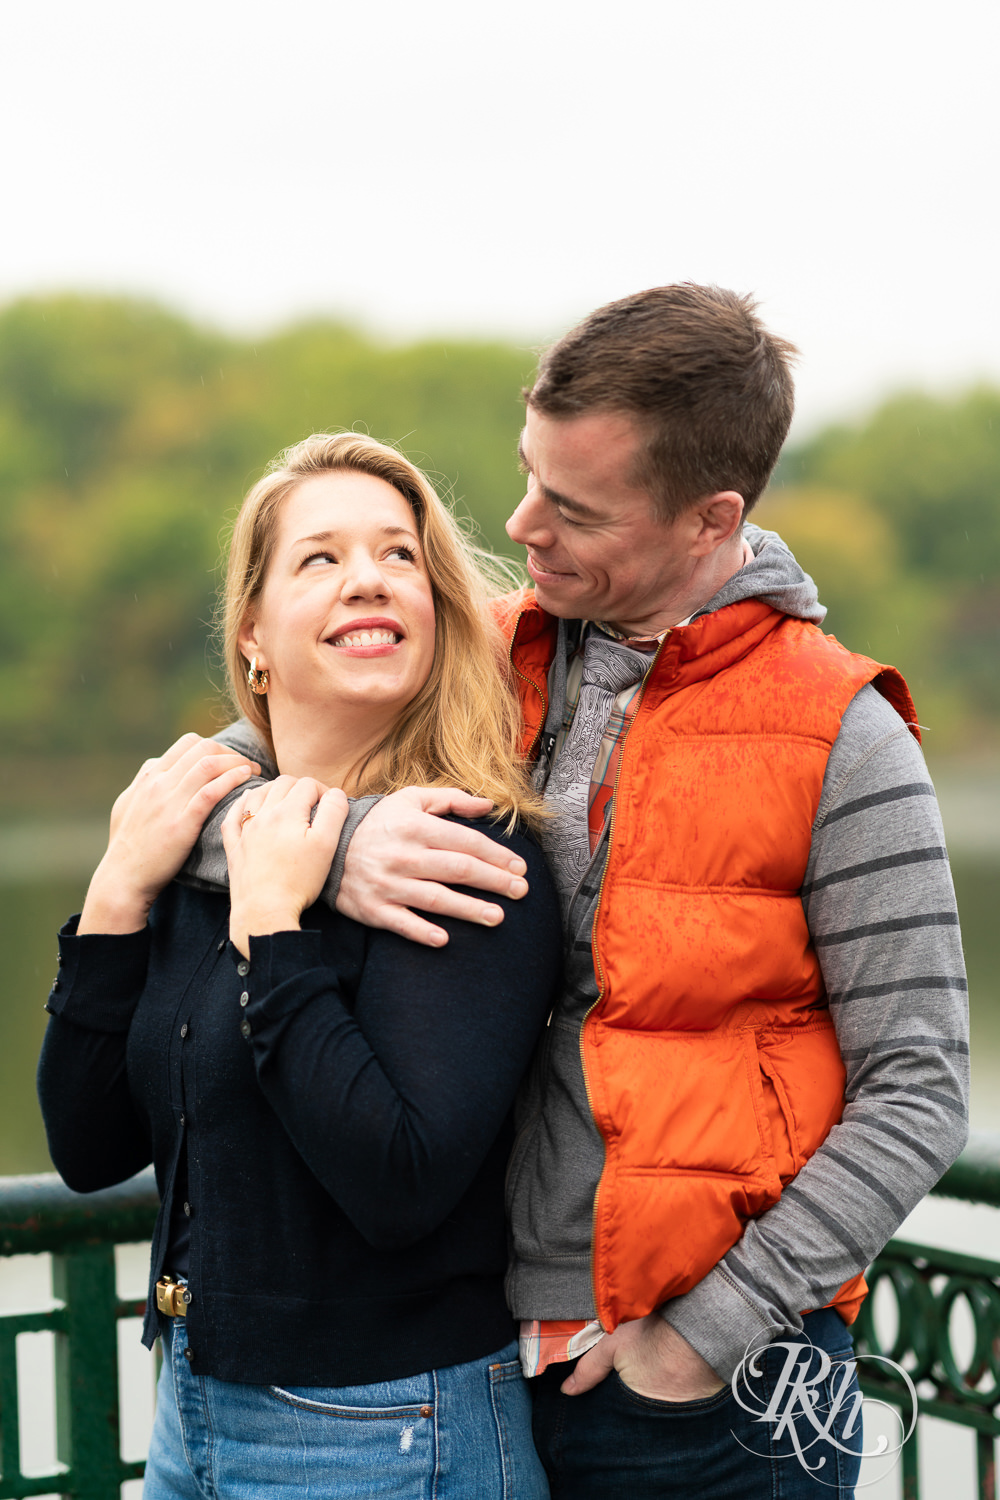 Man and woman in hoodies and jeans smile during rainy engagement photos at Boom Island Park in Minneapolis, Minnesota.